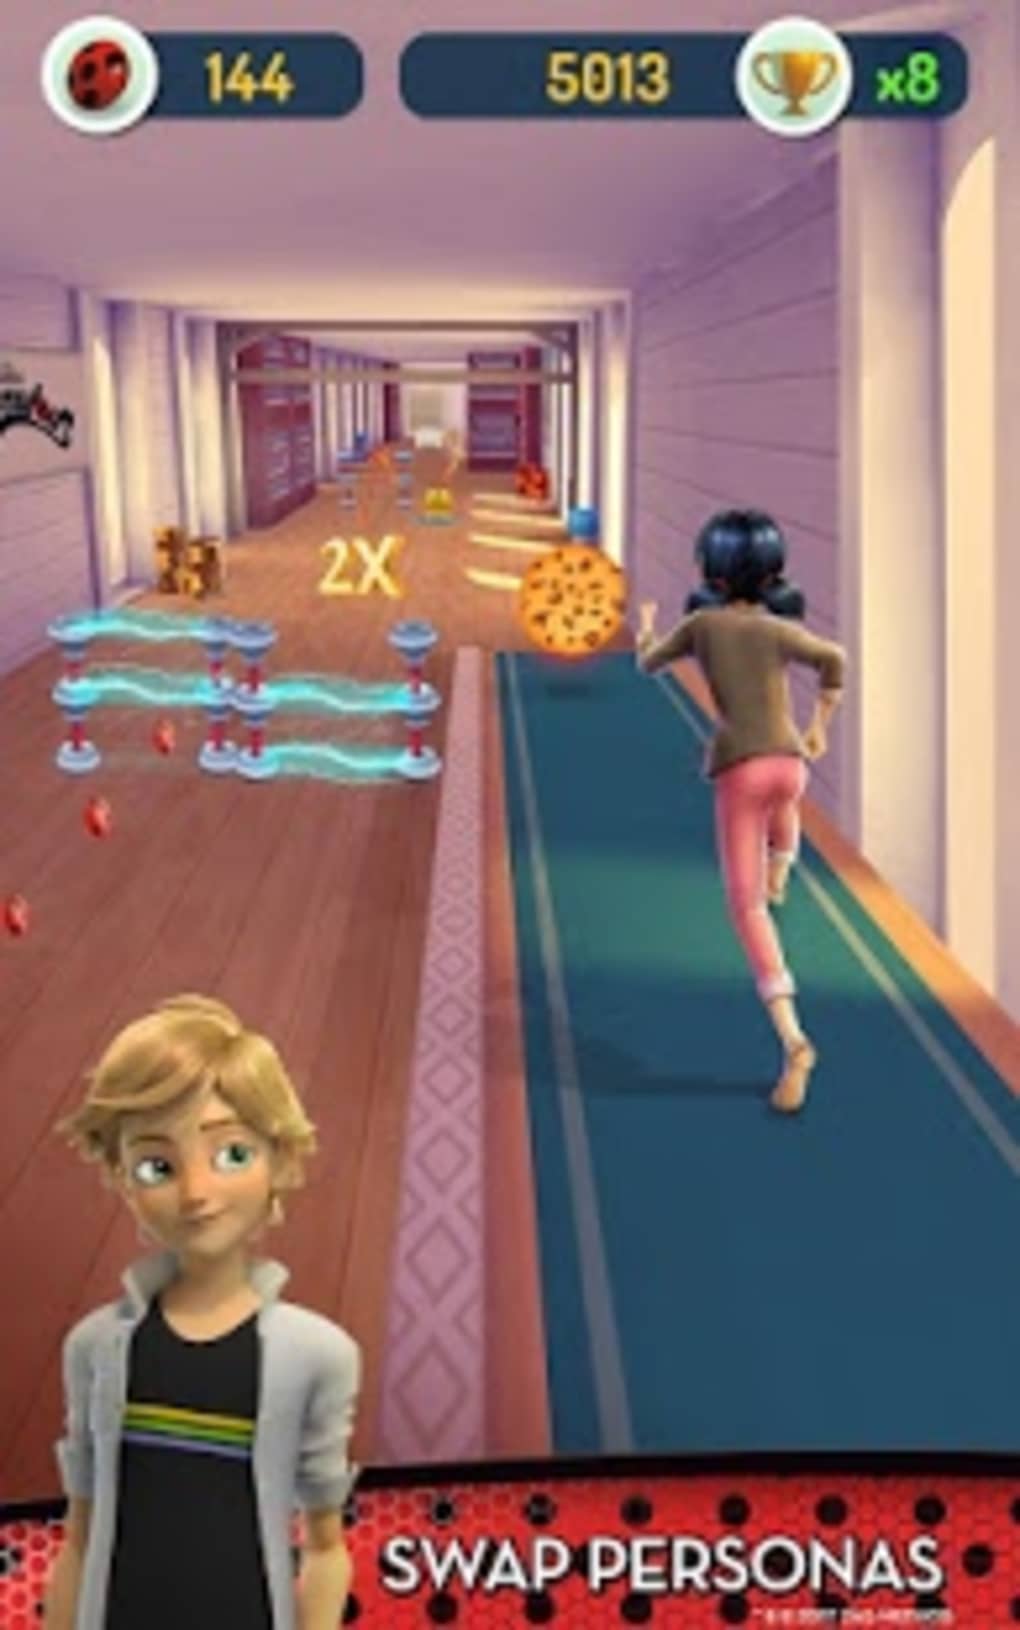 Miraculous Ladybug & Cat Noir - Download & Play for Free Here